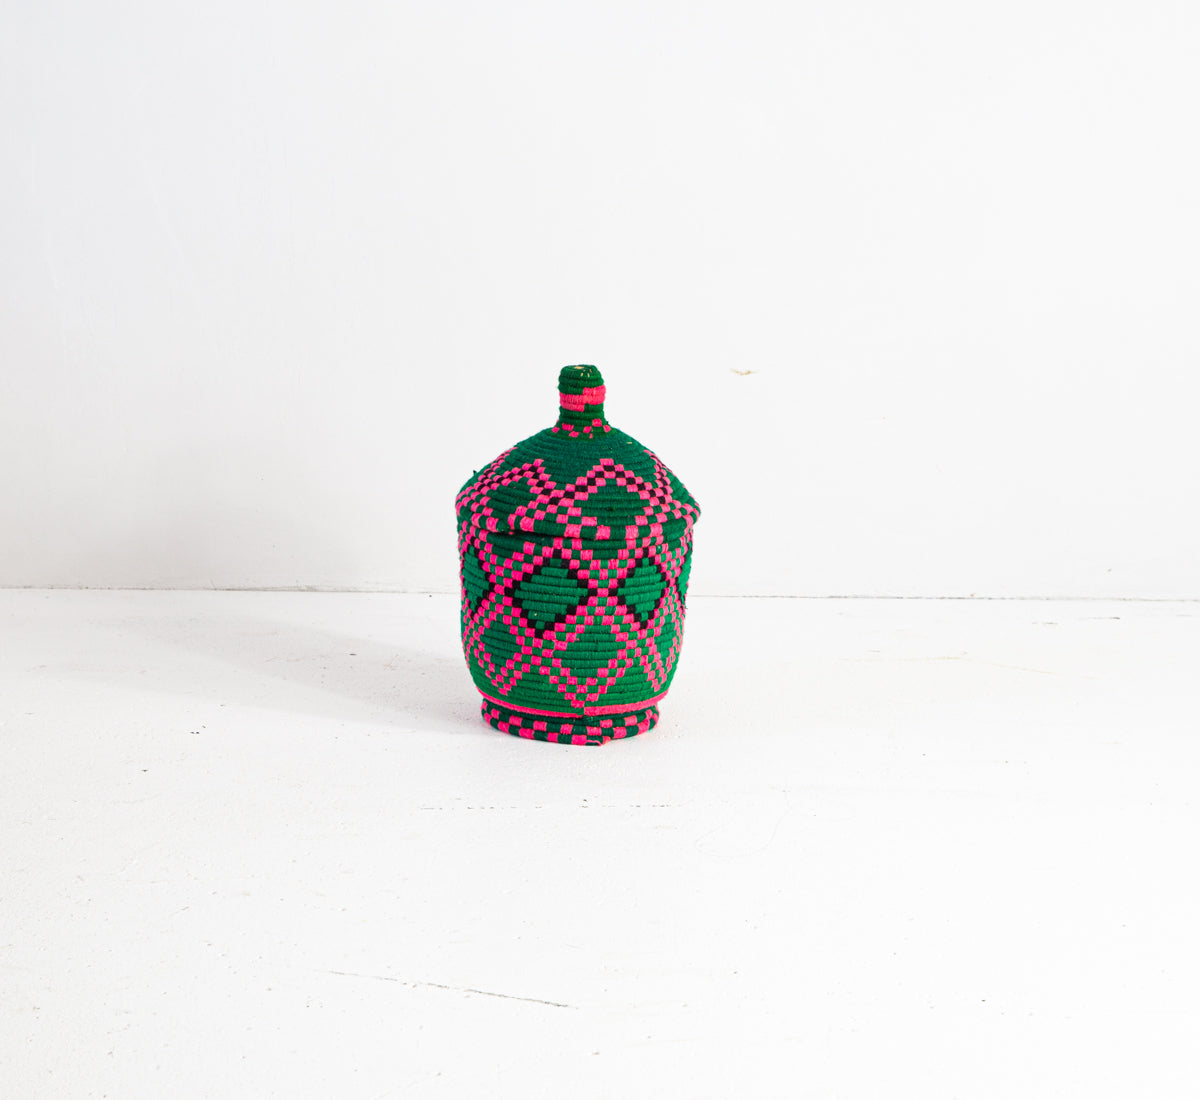 Moroccan Woven Basket - Green and Pink